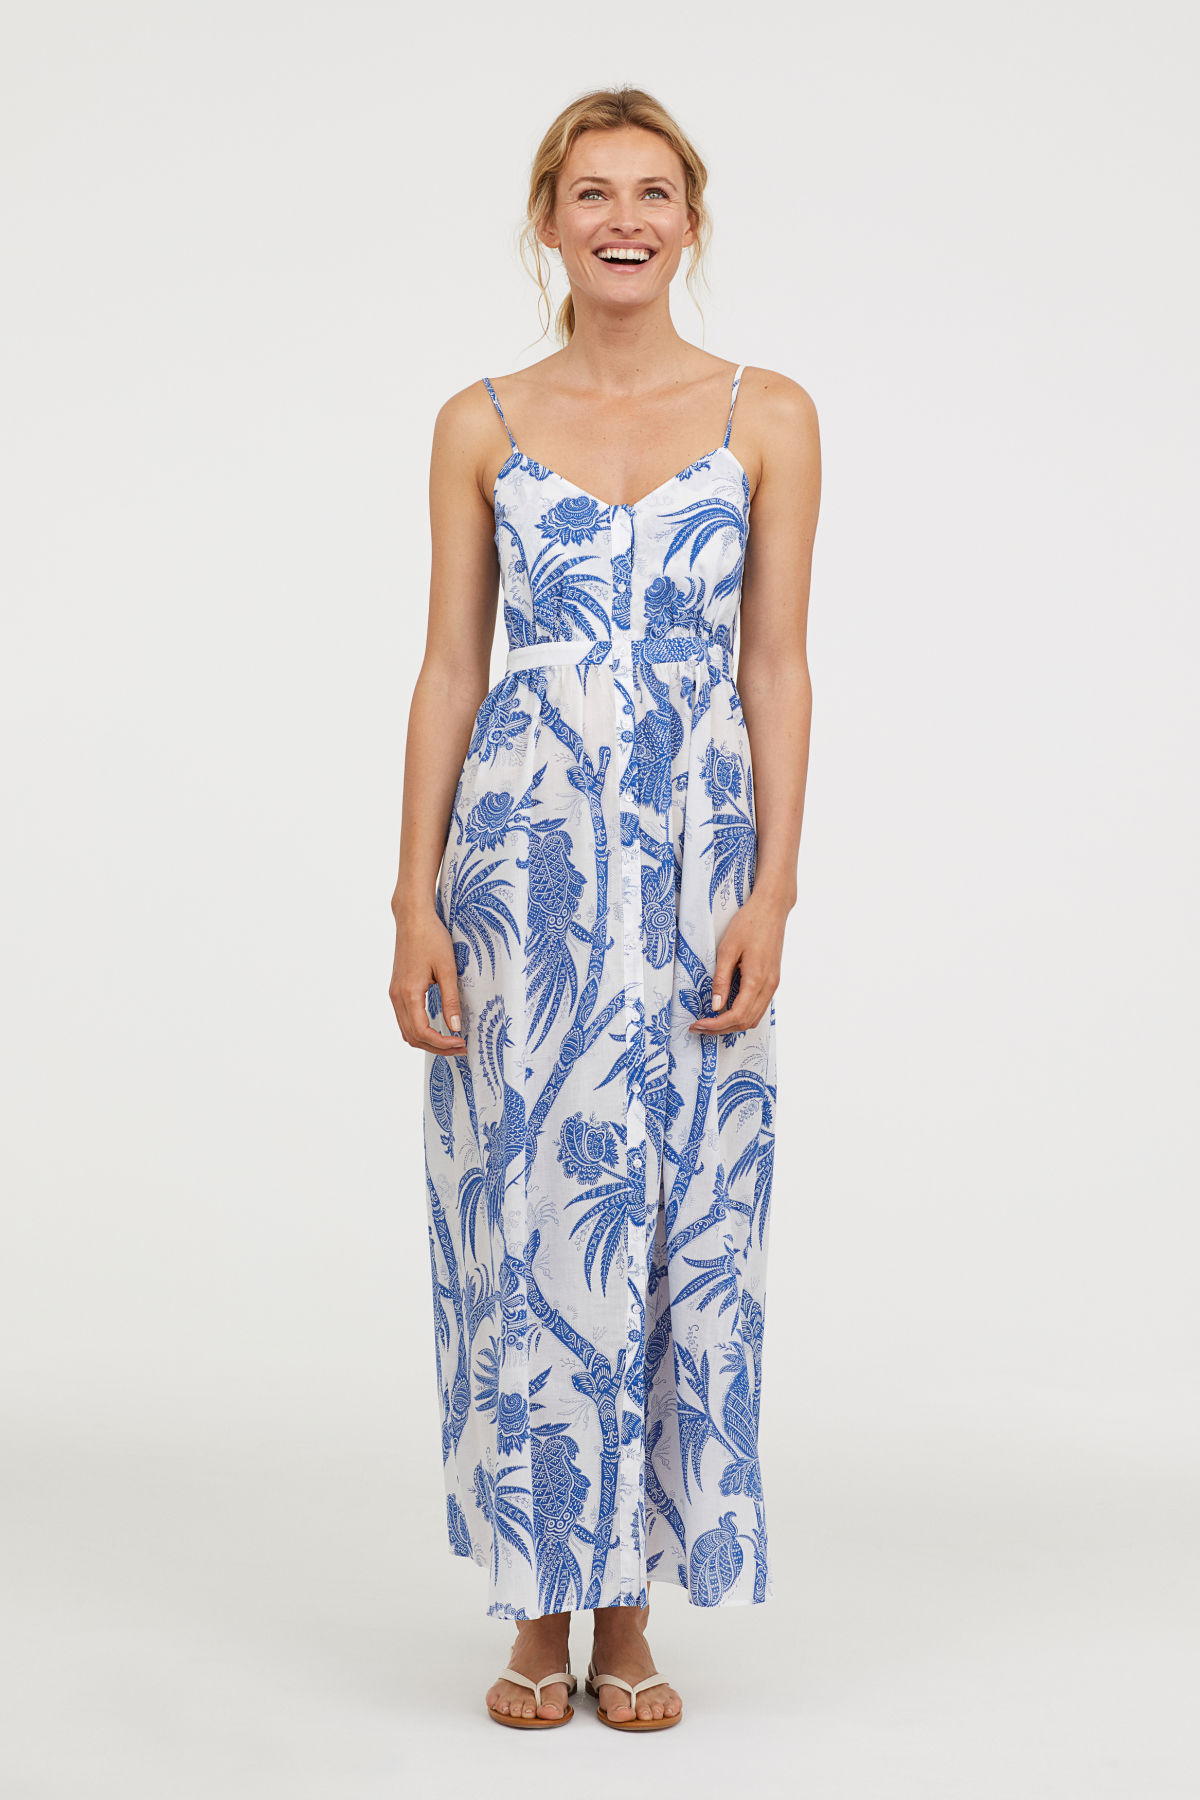 Blue and White Cotton Floral Maxi Dress